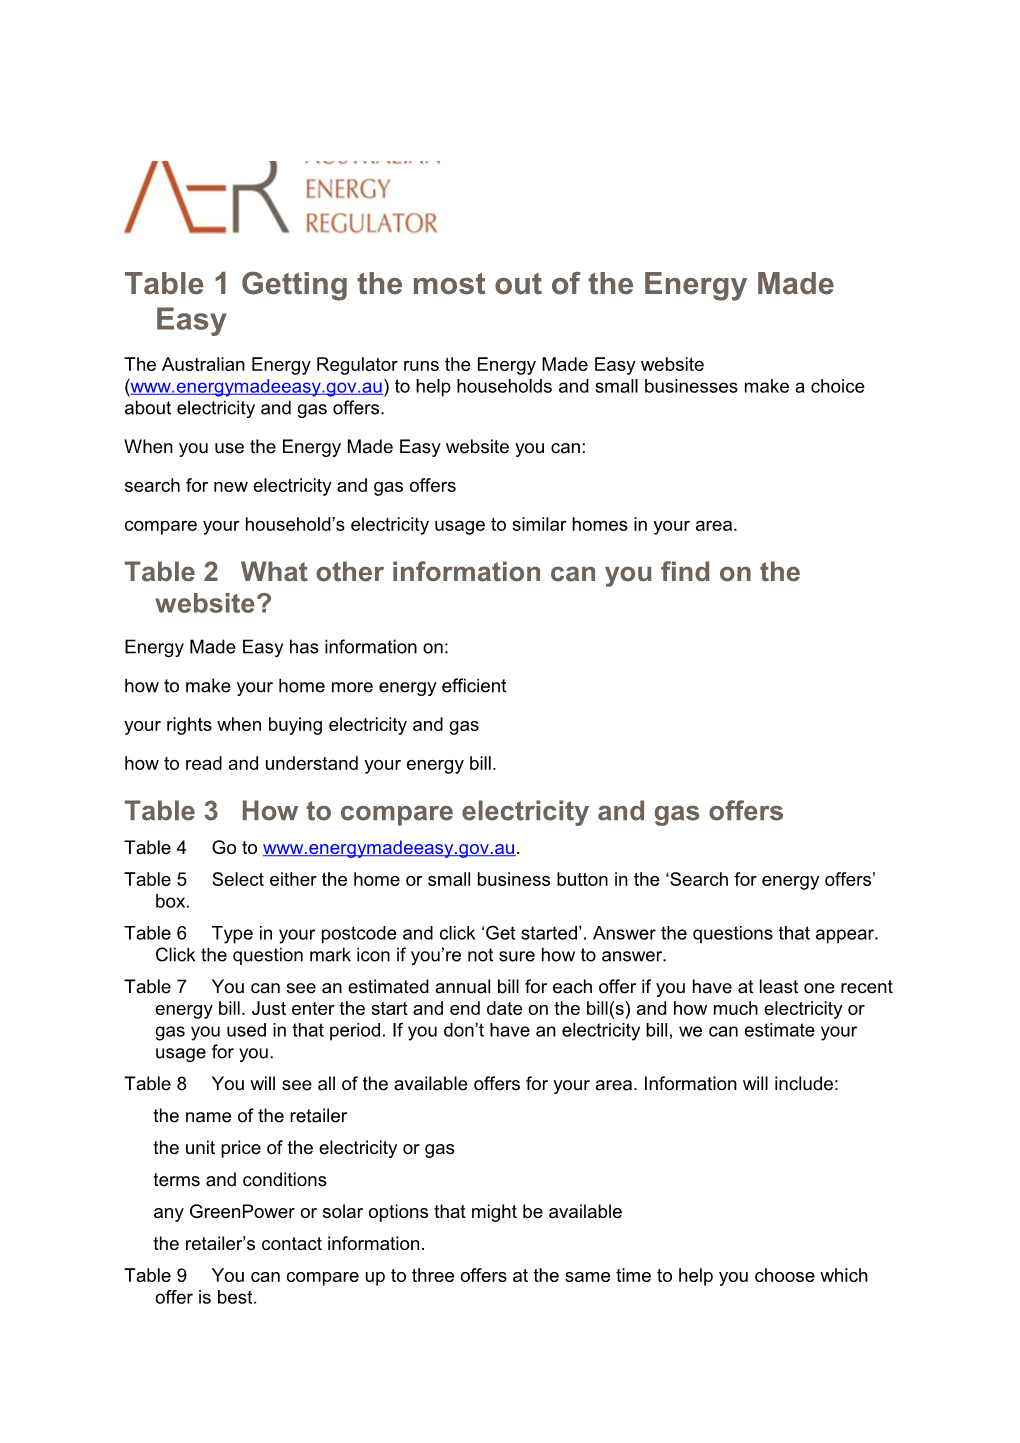 Getting the Most out of the Energy Made Easy Website